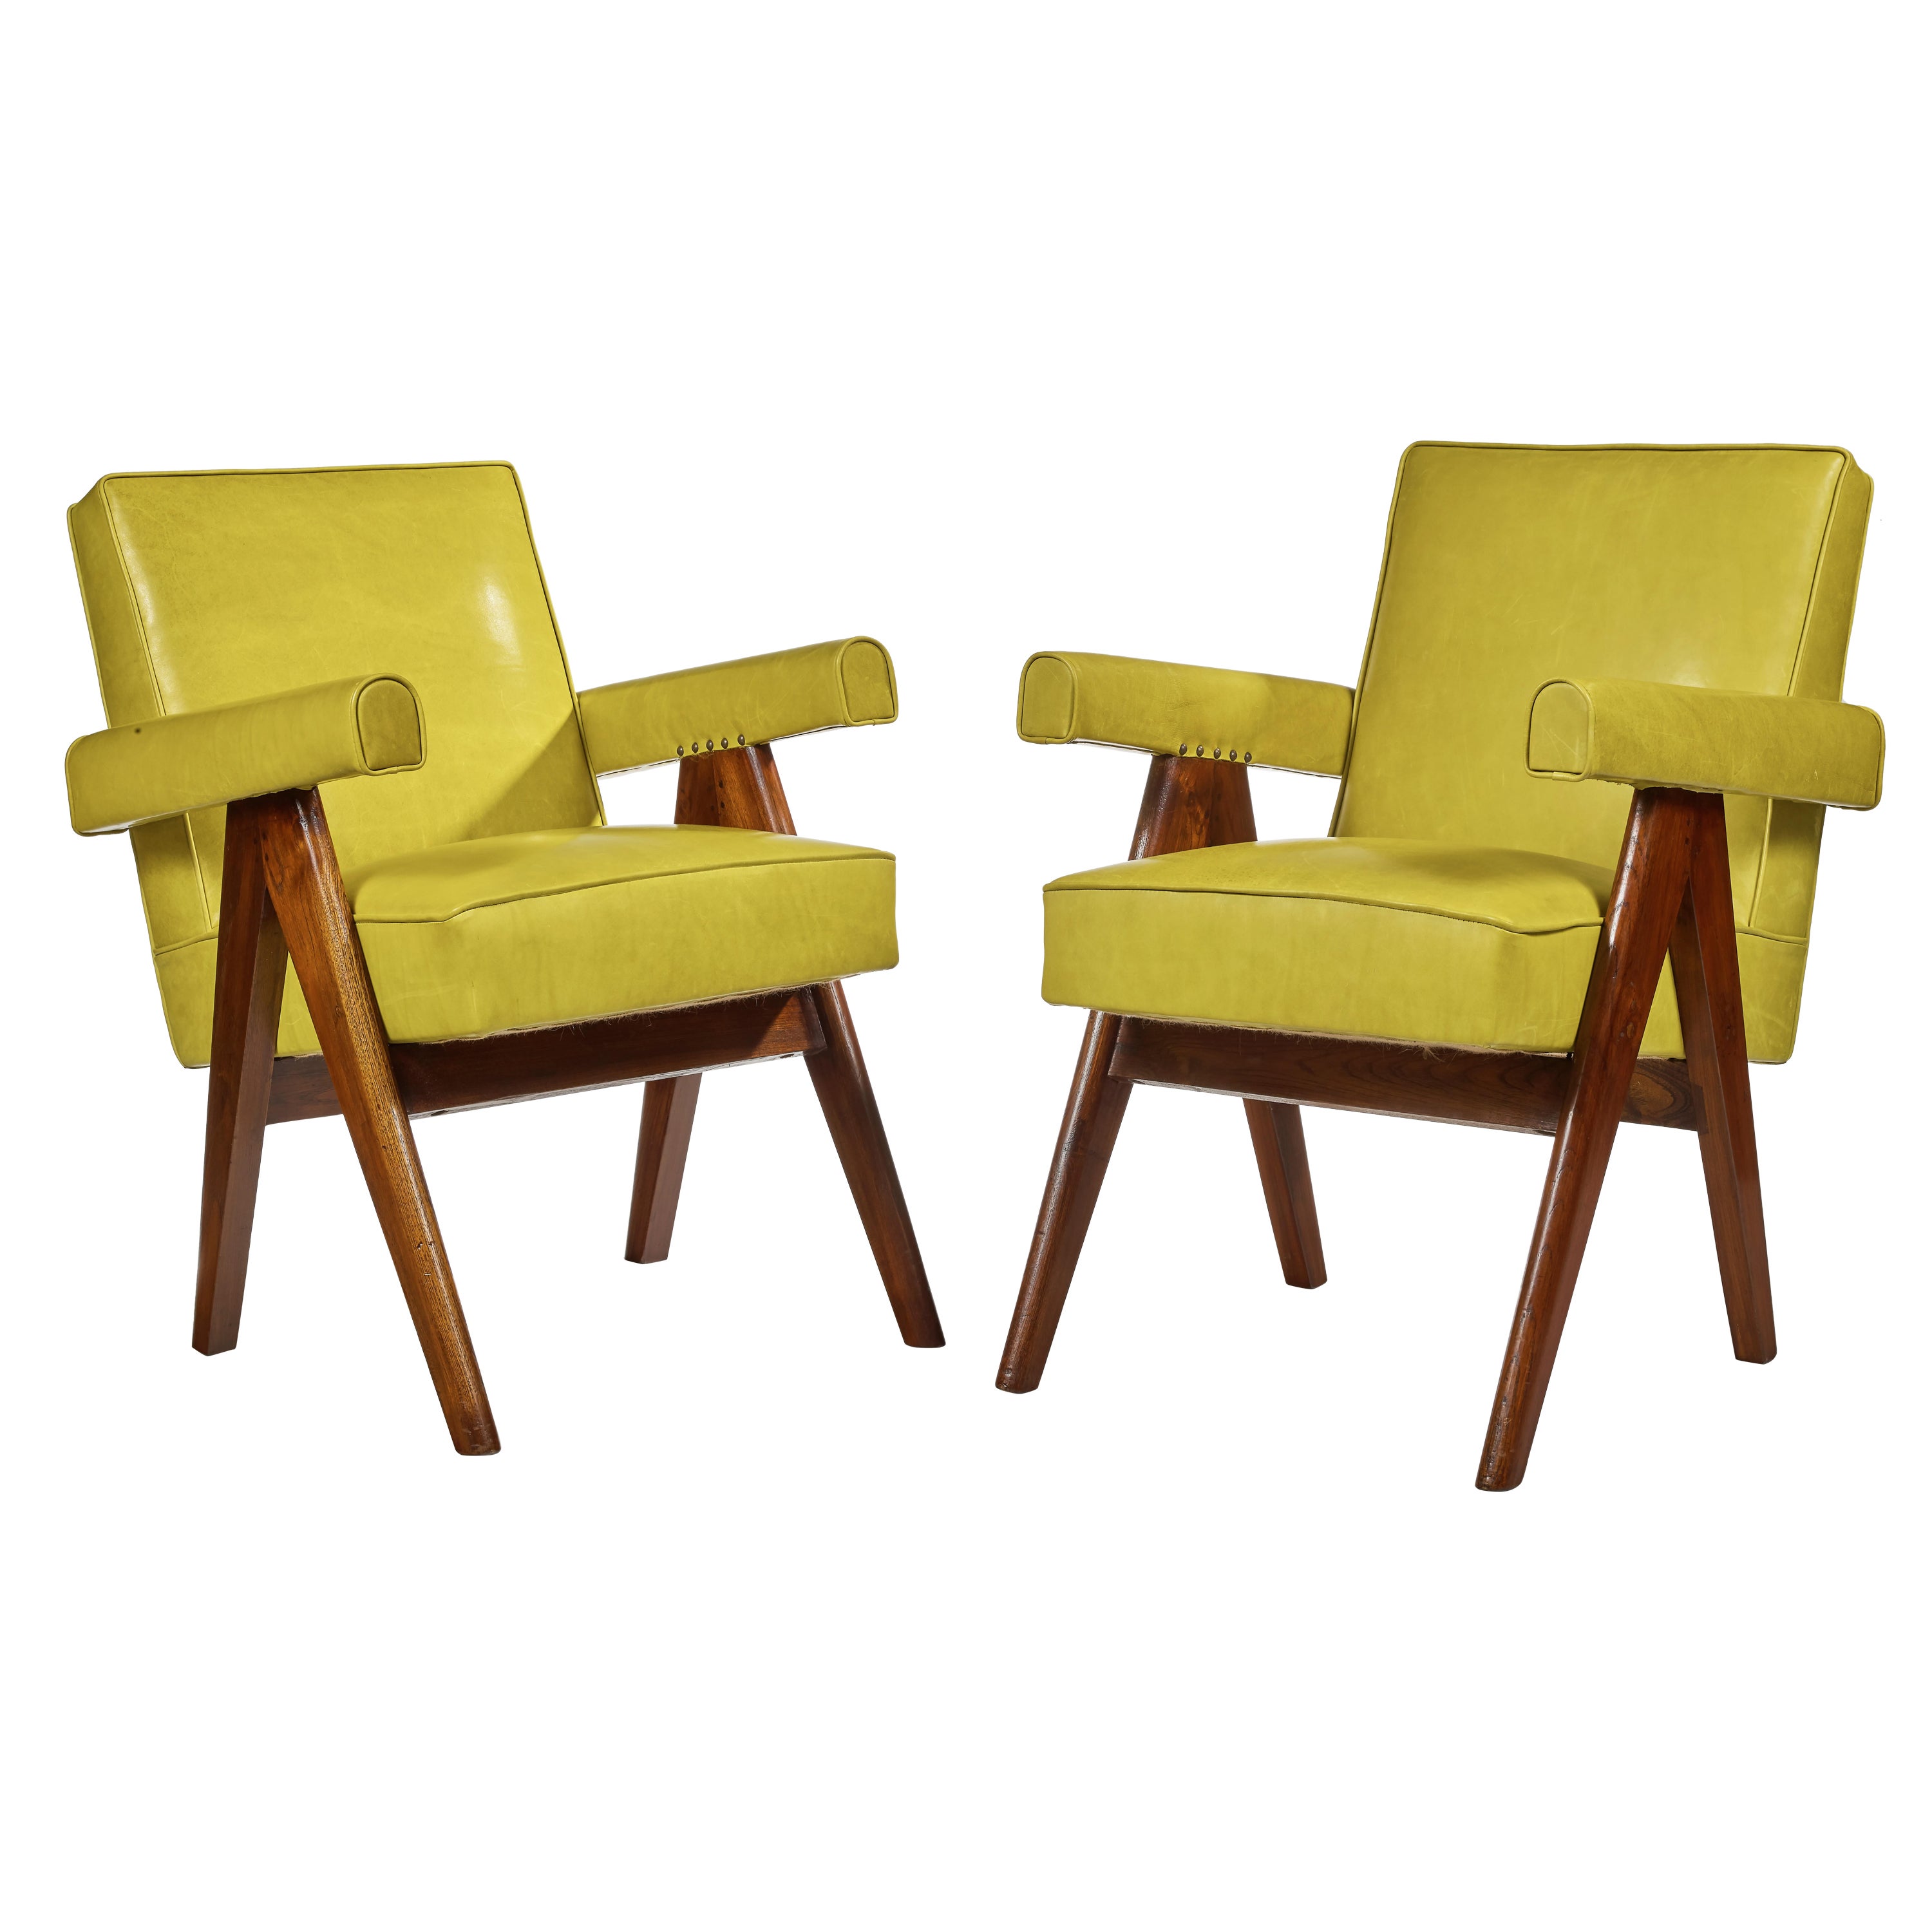 Pierre Jeanneret, PJ-SI-30-D, Committee Armchairs, A Pair, Chandigarh, C. 1955